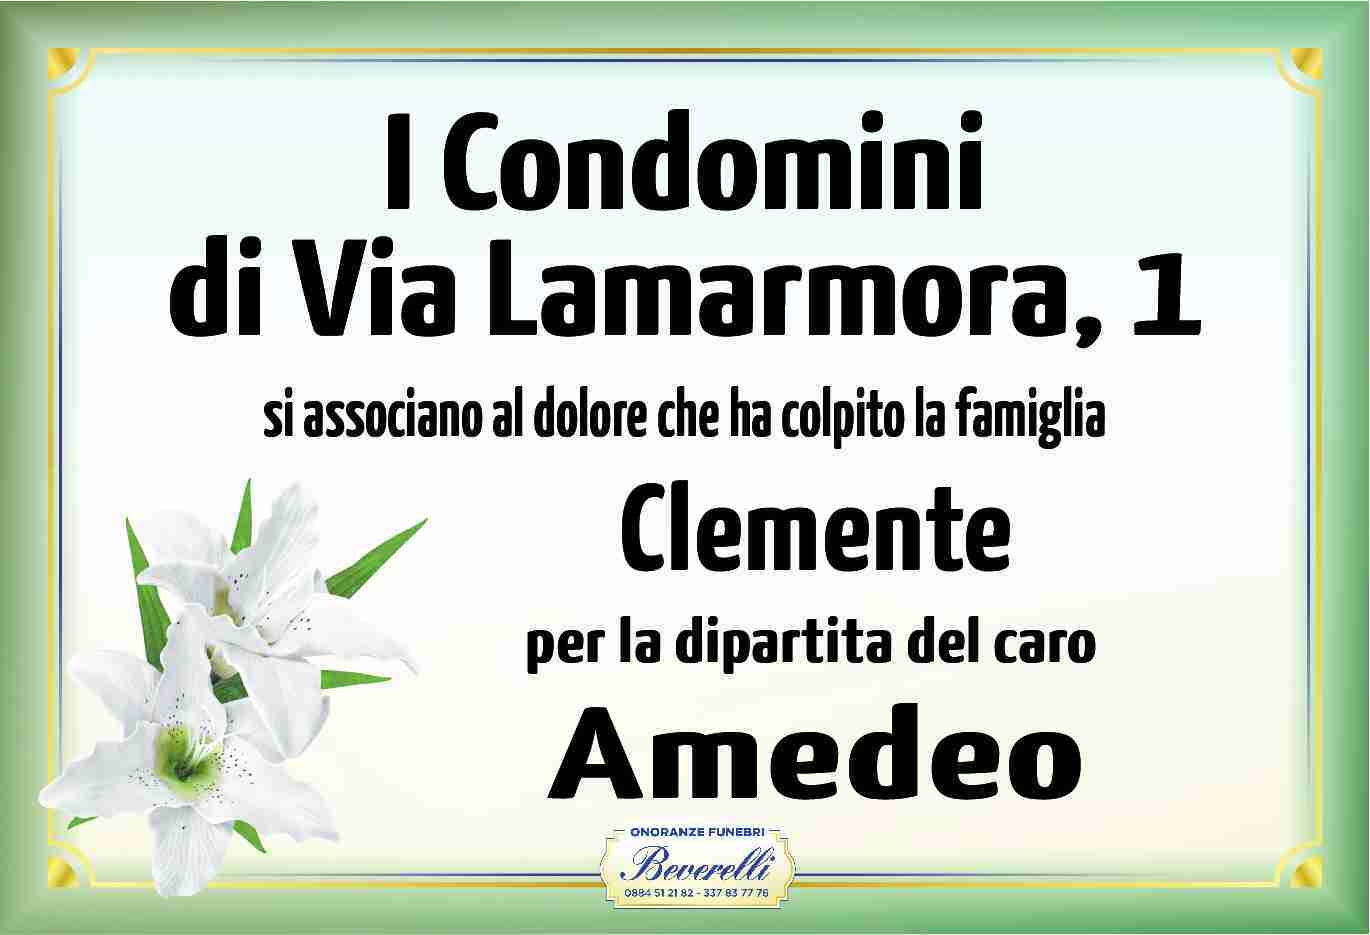 Amedeo Clemente